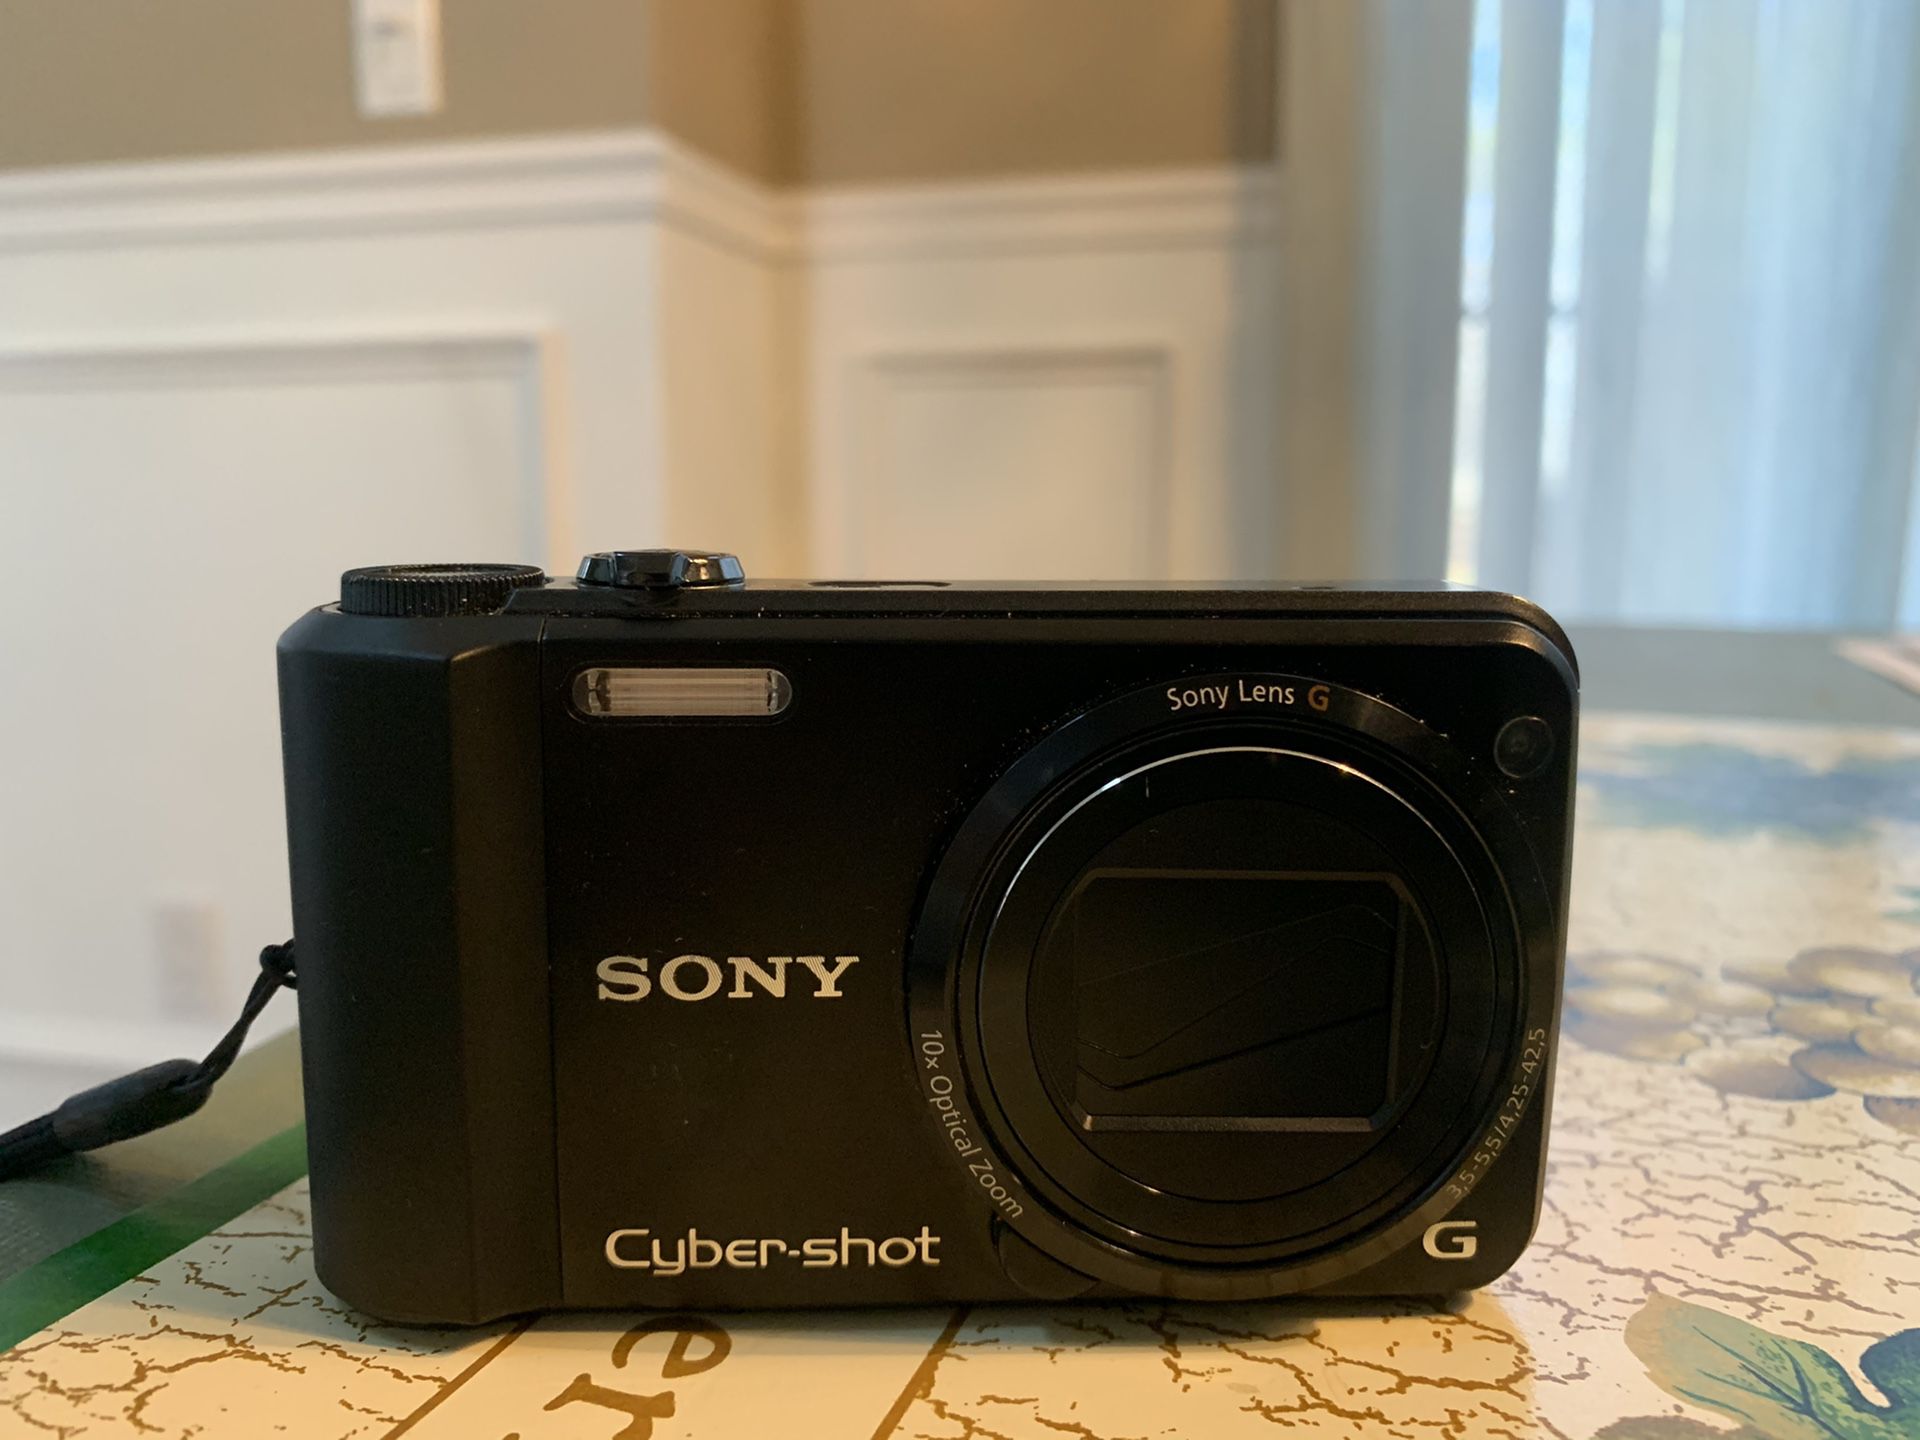 Sony Cybershot DSC-H70 16.1 MP Digital still camera with 10x wide angle zoom G lens and 3.0 inch lcd black. Comes with carry case and sd card